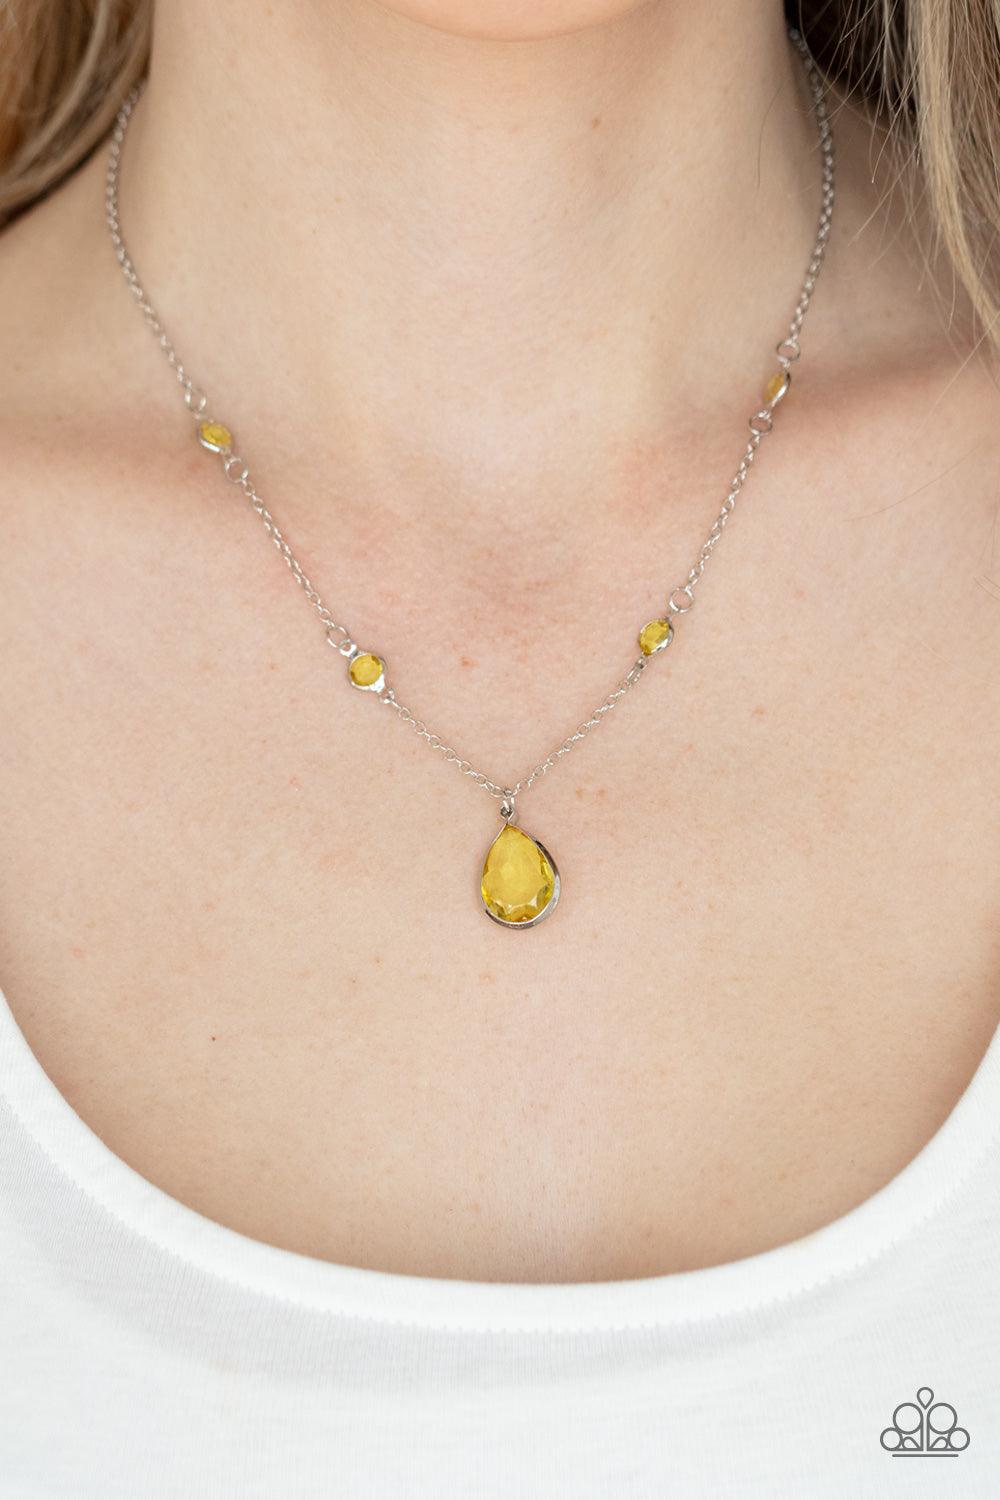 Paparazzi Accessories Romantic Rendezvous - Yellow A glassy yellow teardrop gem encased in a silver frame dips elegantly below the collar. Small round yellow gems accent the silver chain for a delicate and dreamy display. Features an adjustable clasp clos